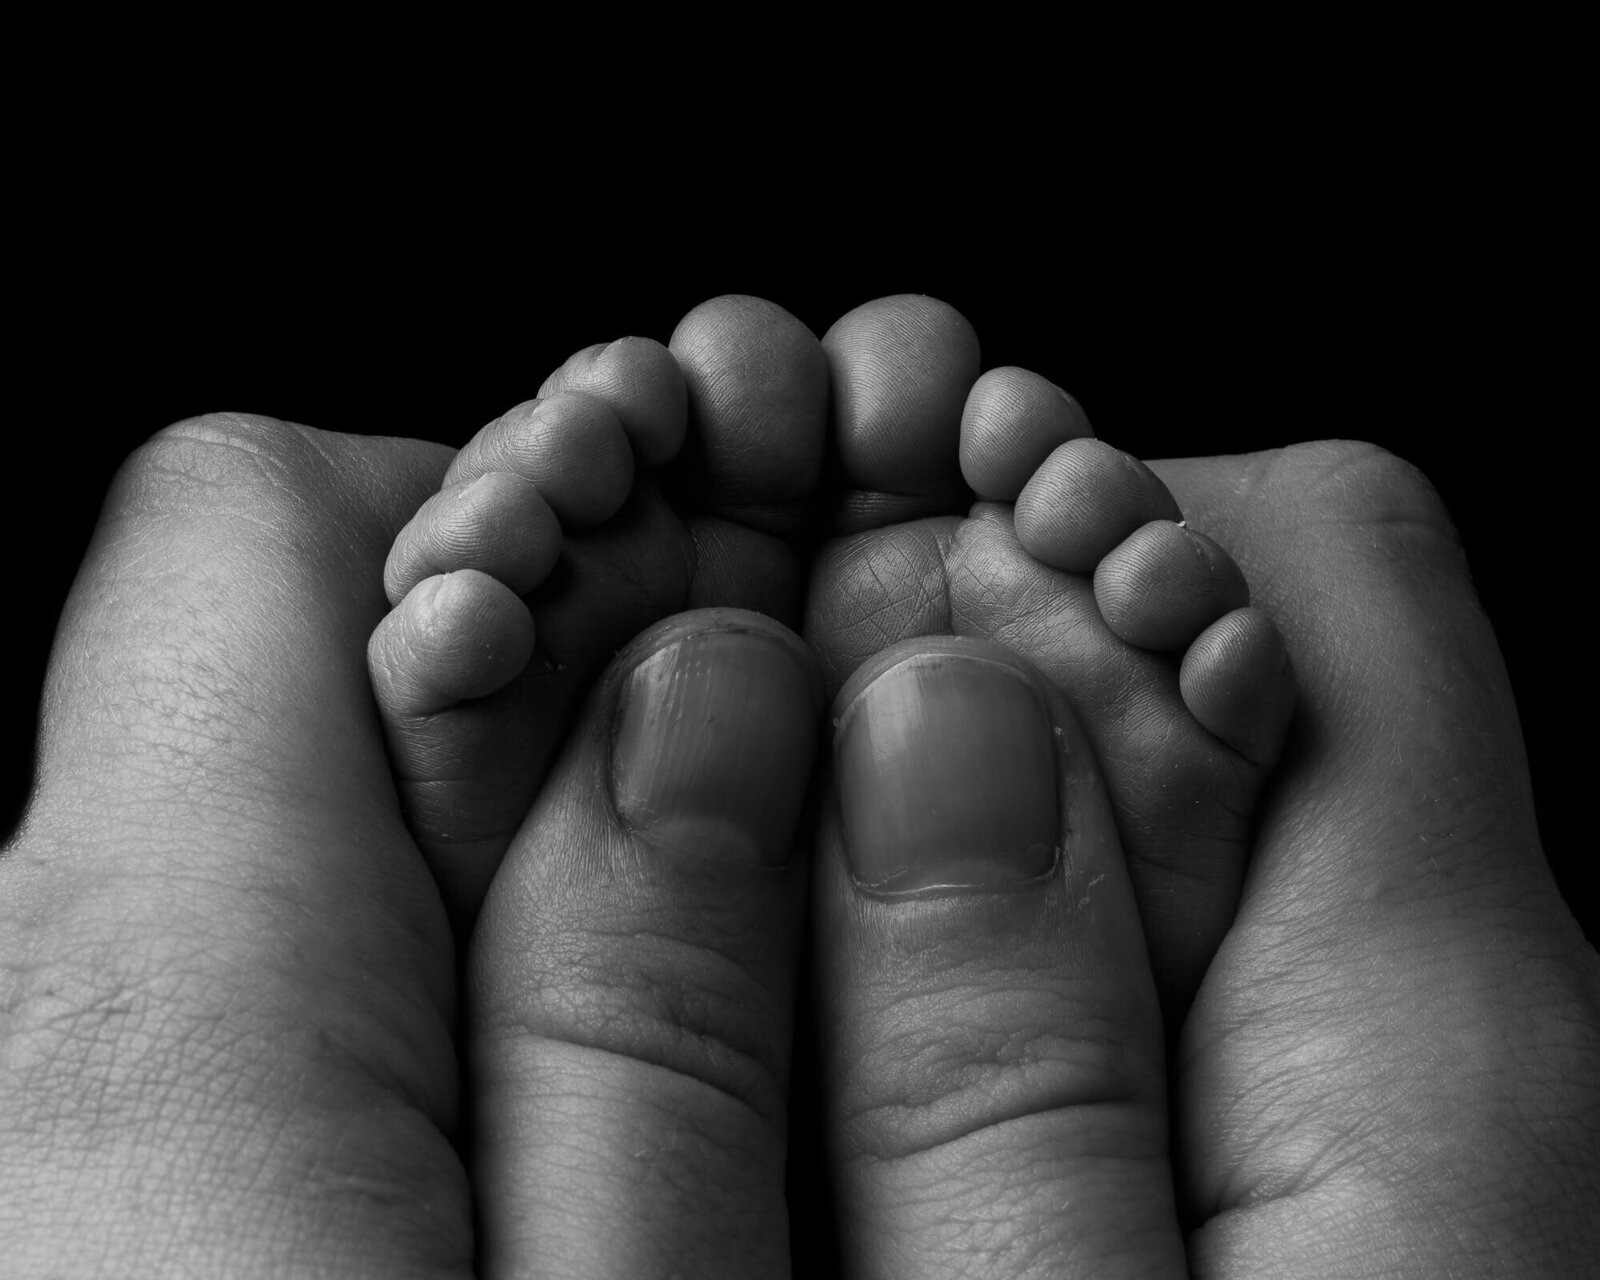 Black and white close-up picture of mom holding baby's feet